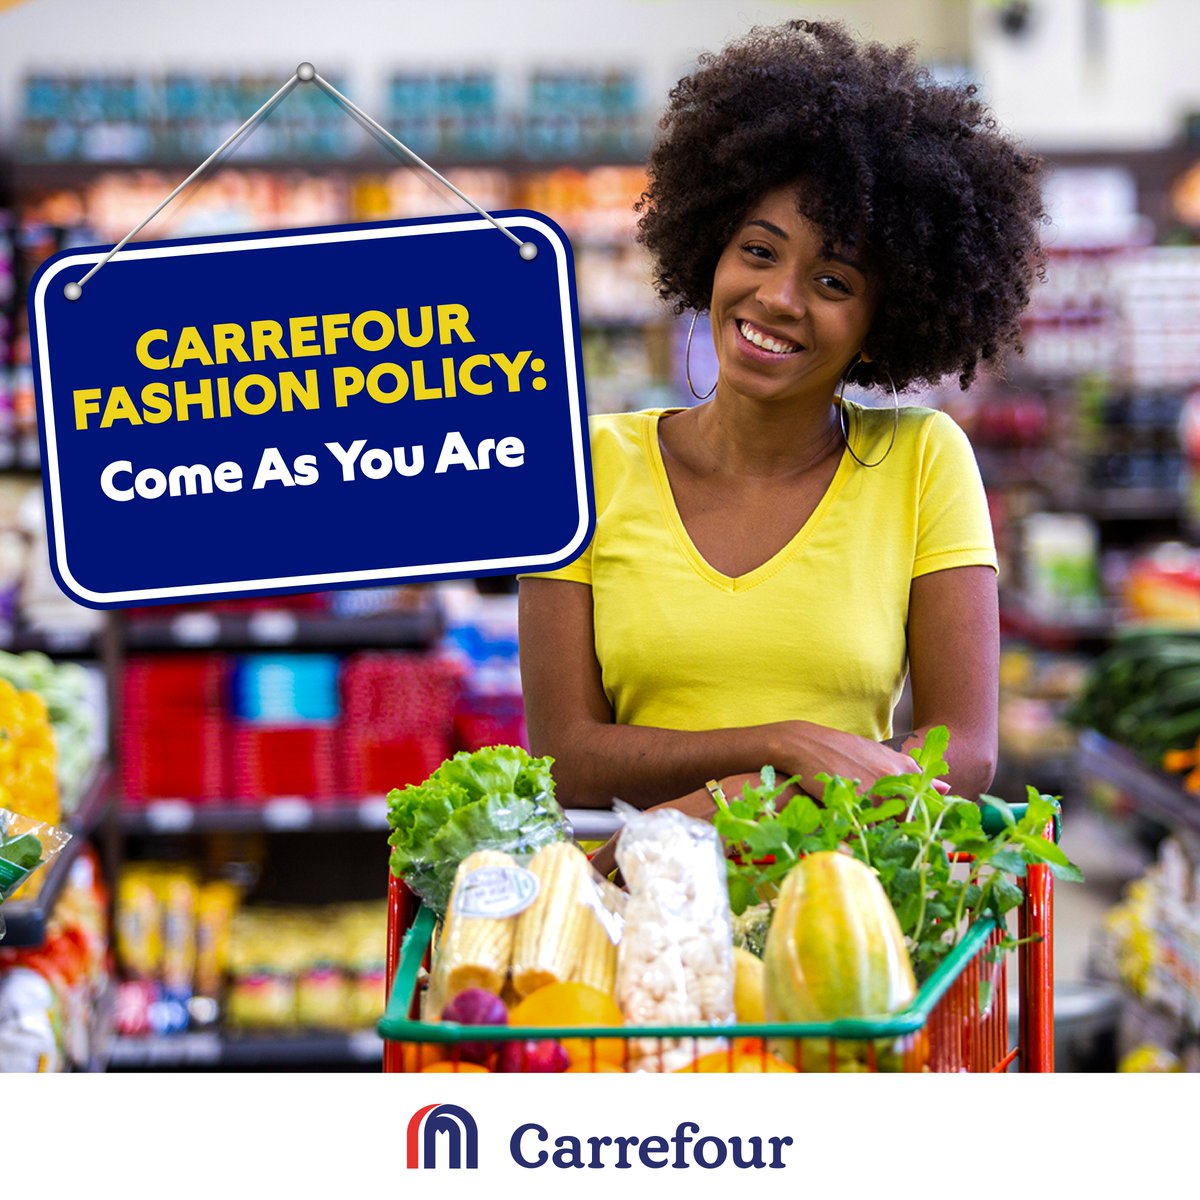 The best outfit😎 to shop in is anything that makes you happy and comfy. 

#ComeAsYouAre to Carrefour.

#MoreForYou #GreatMoments @MajidAlFuttaim